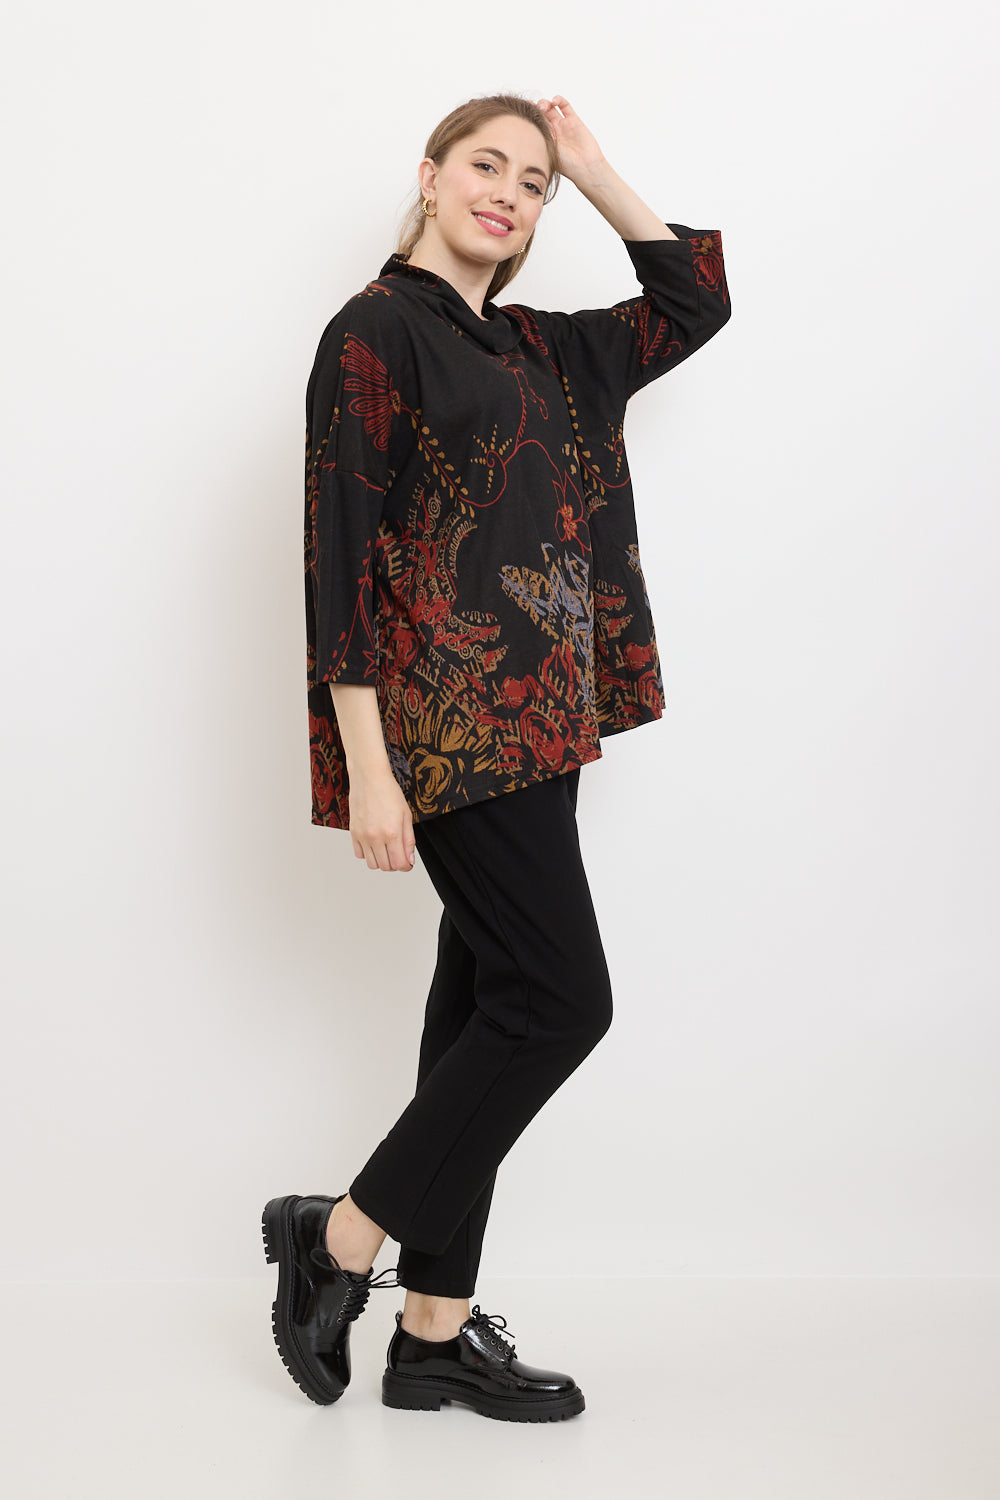 Wildflower patterned blouse